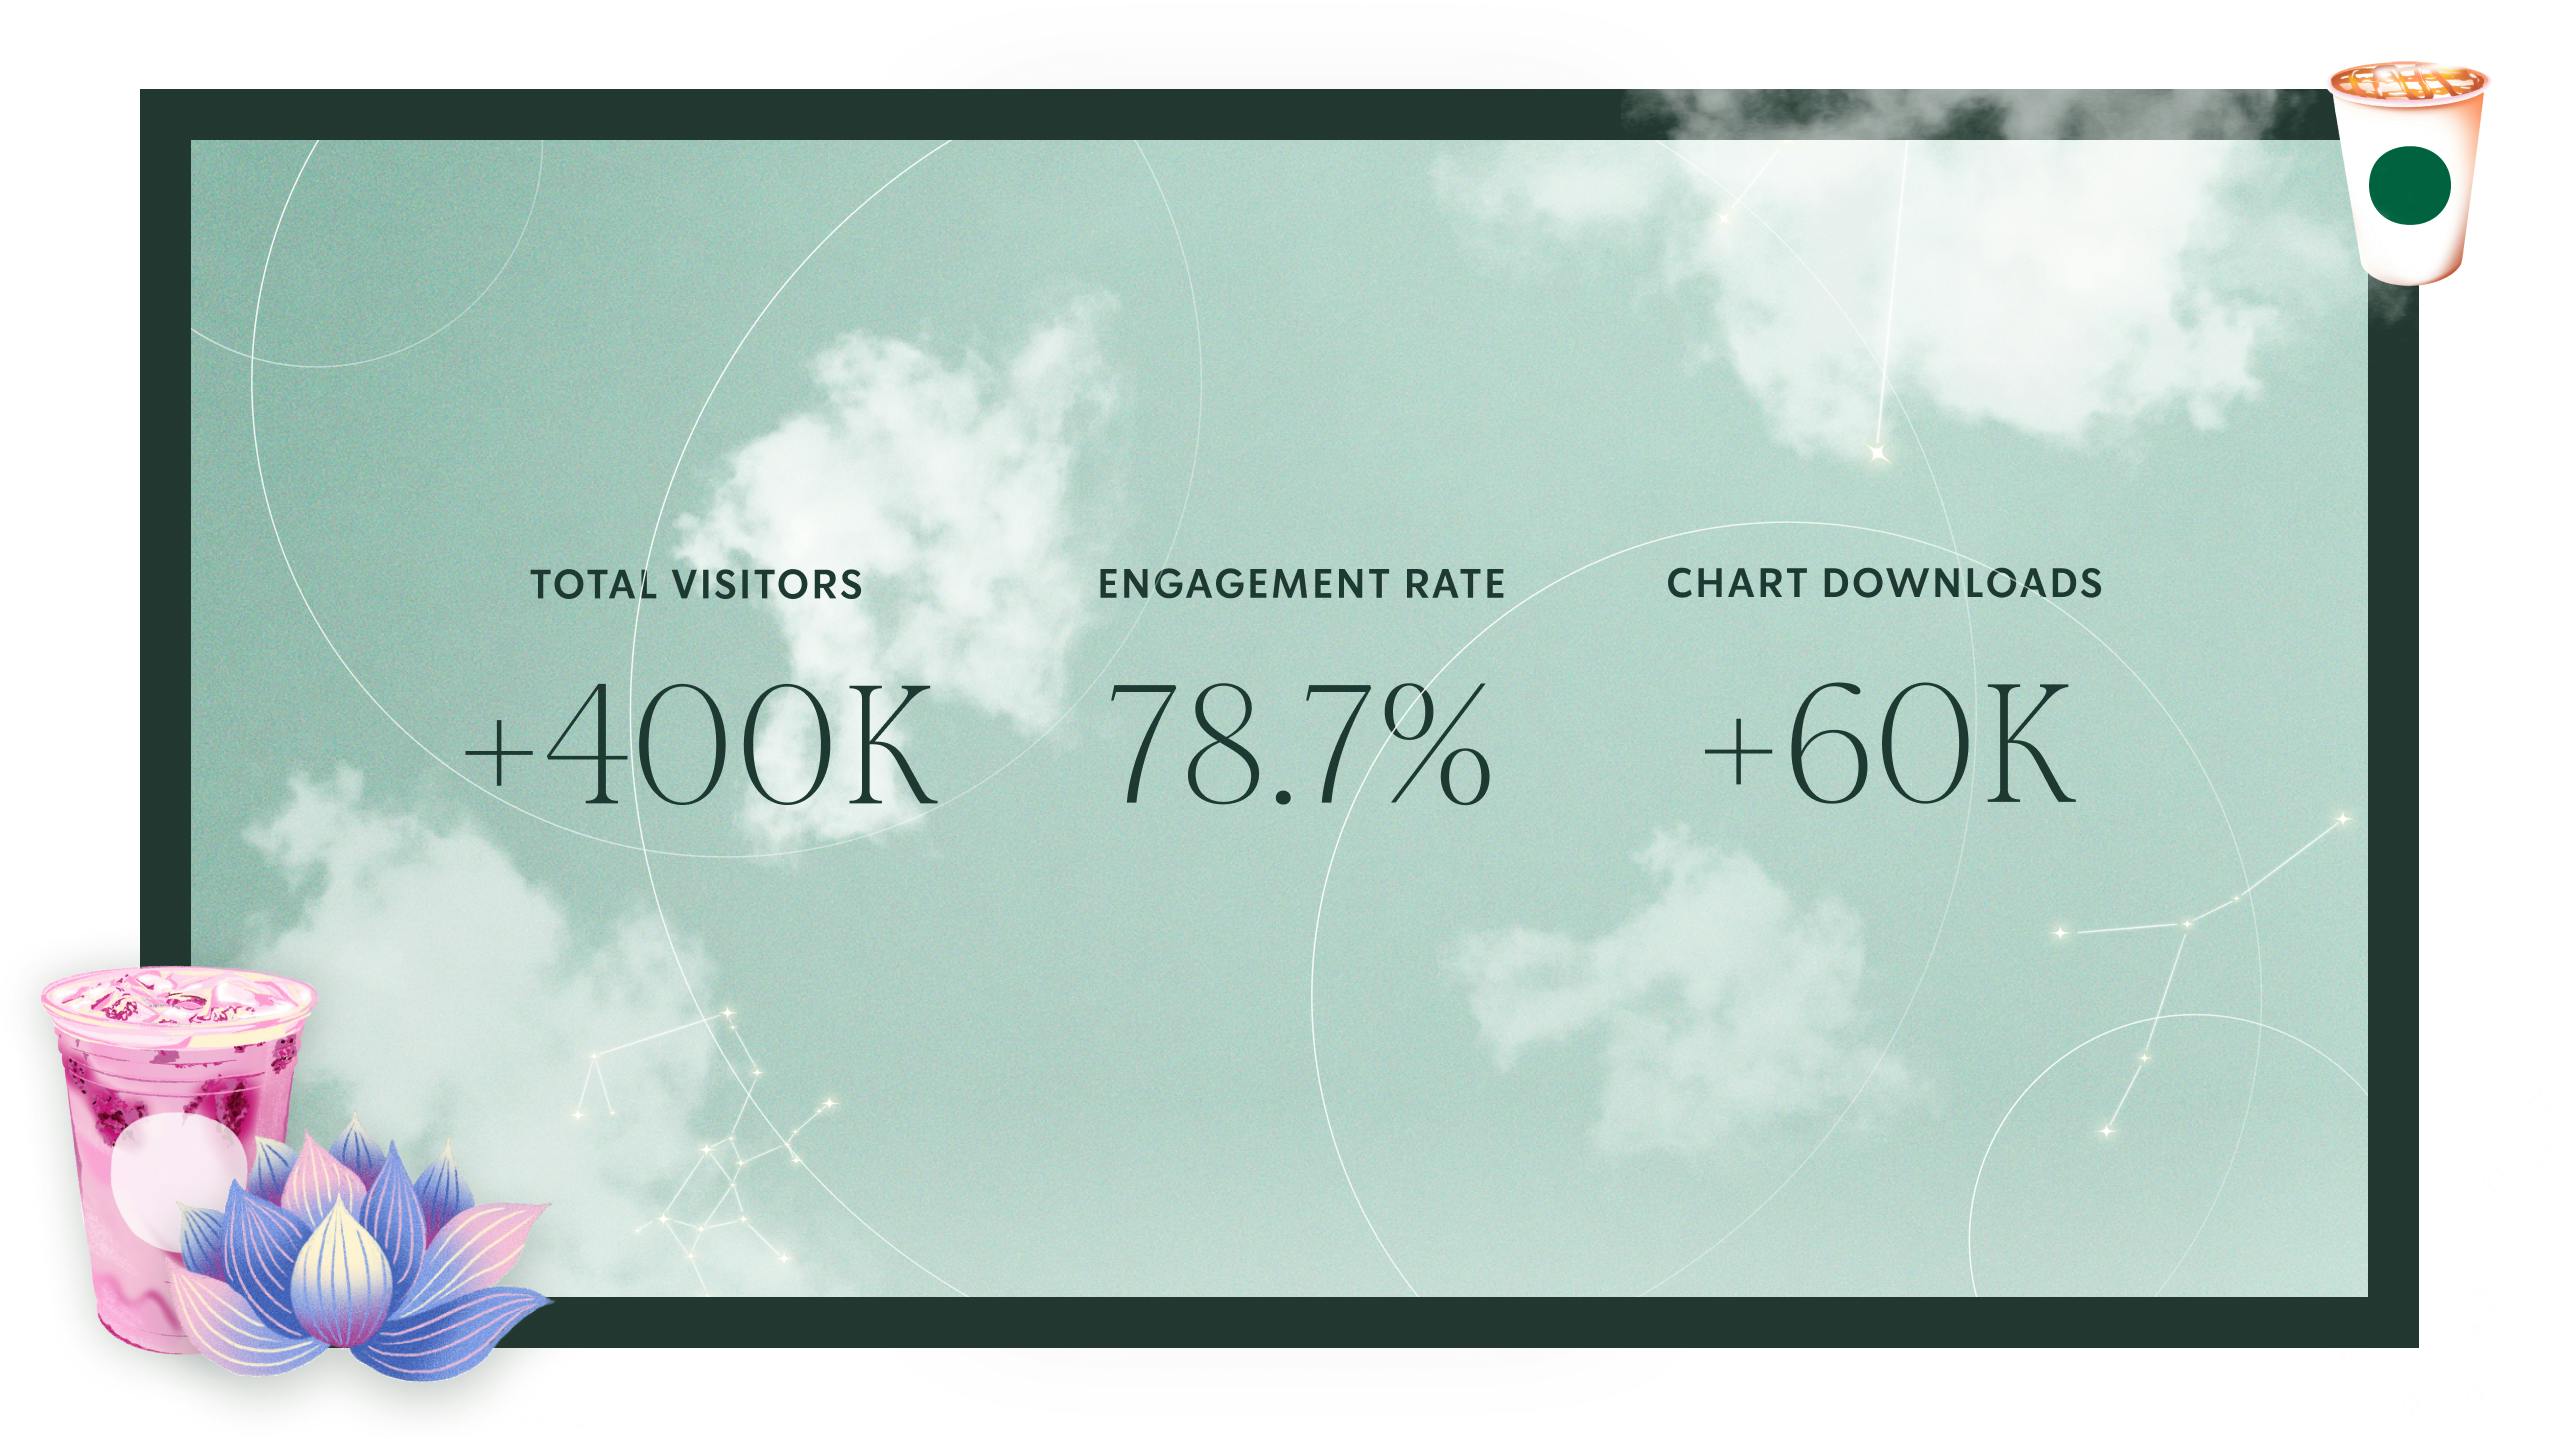 Overall this campaign recieved 400 000 visitors, with a 78.6% engagement increase and 60 000 chart downloads.